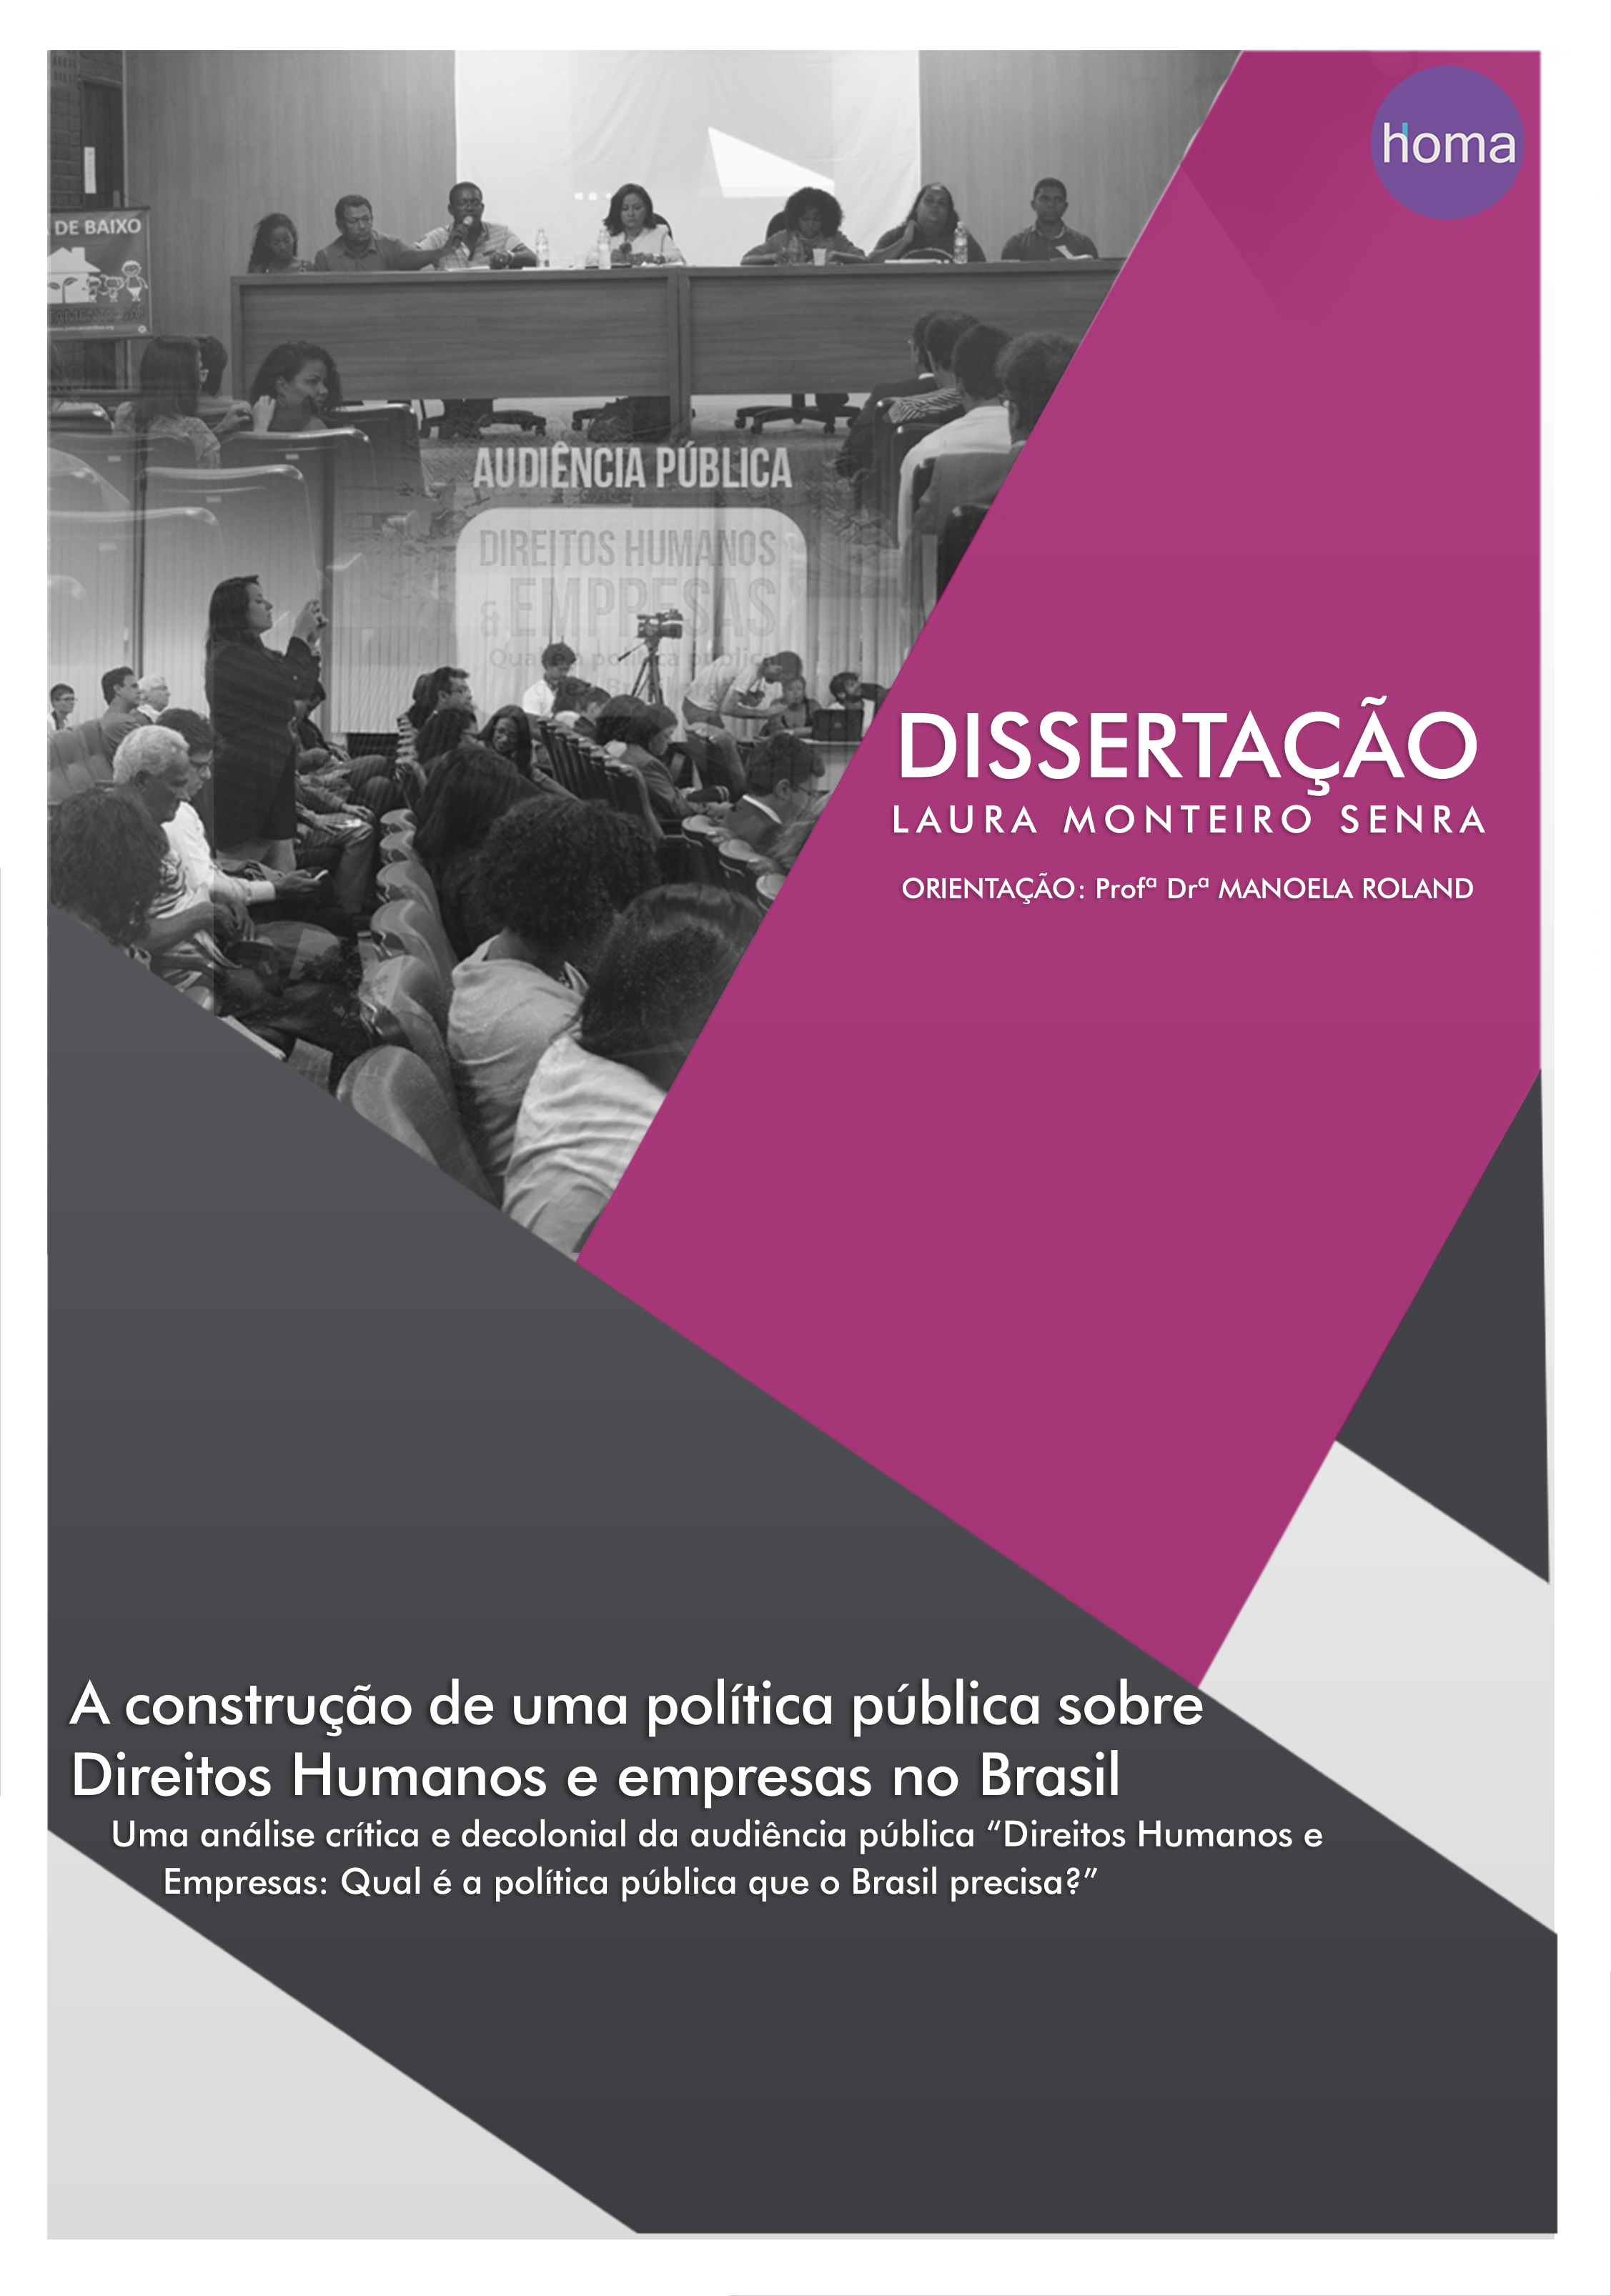 The construction of a public policy on Human Rights and business in Brazil: a critical and decolonial analysis of the public hearing "Human Rights and Business: what public policy does Brazil need?"